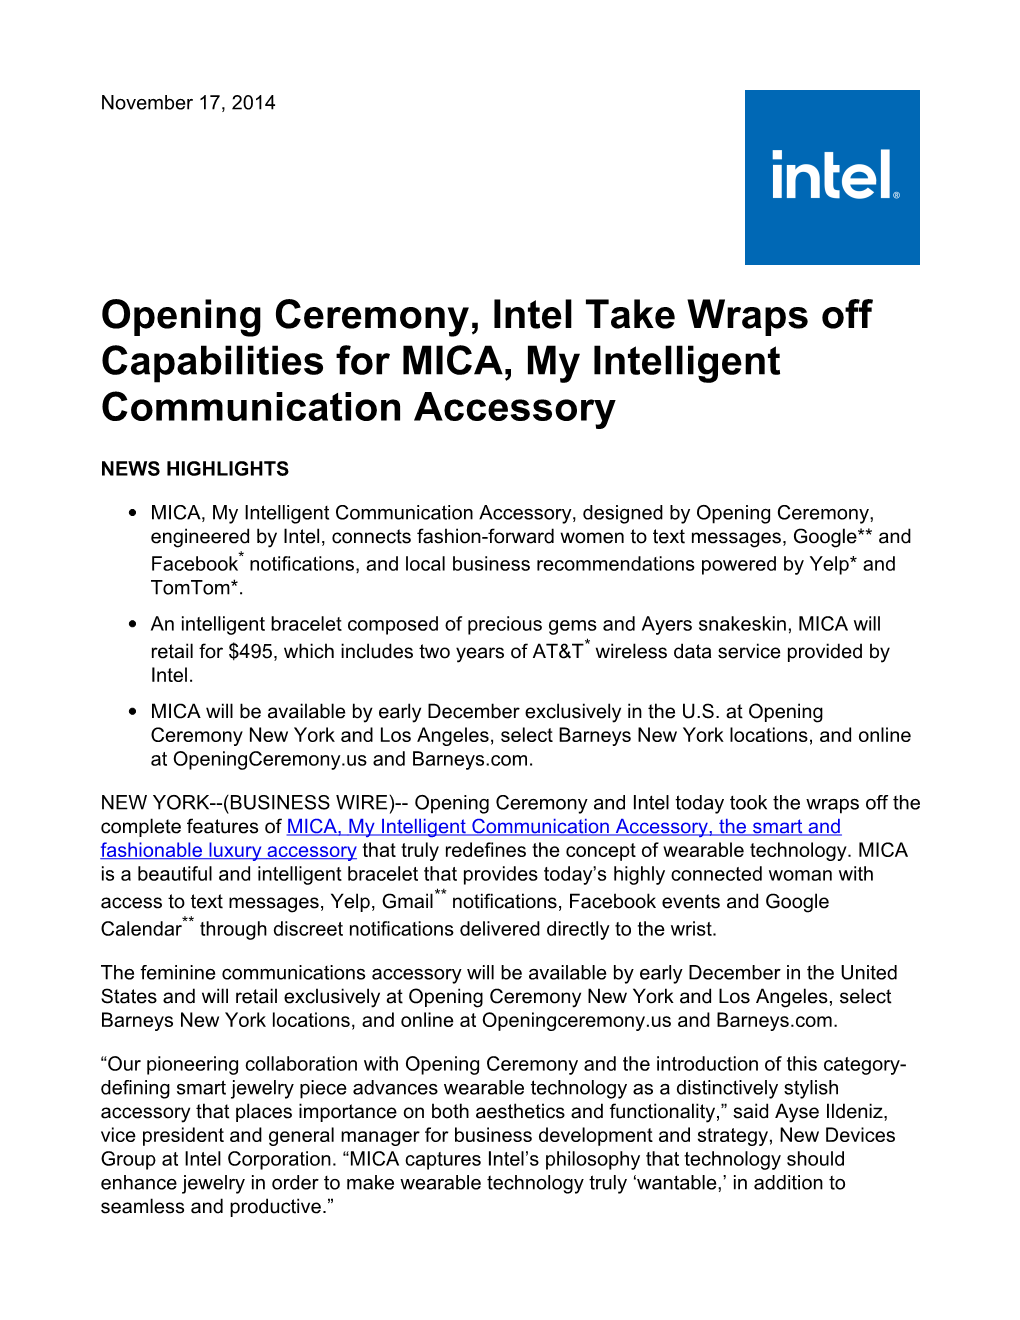 Opening Ceremony, Intel Take Wraps Off Capabilities for MICA, My Intelligent Communication Accessory